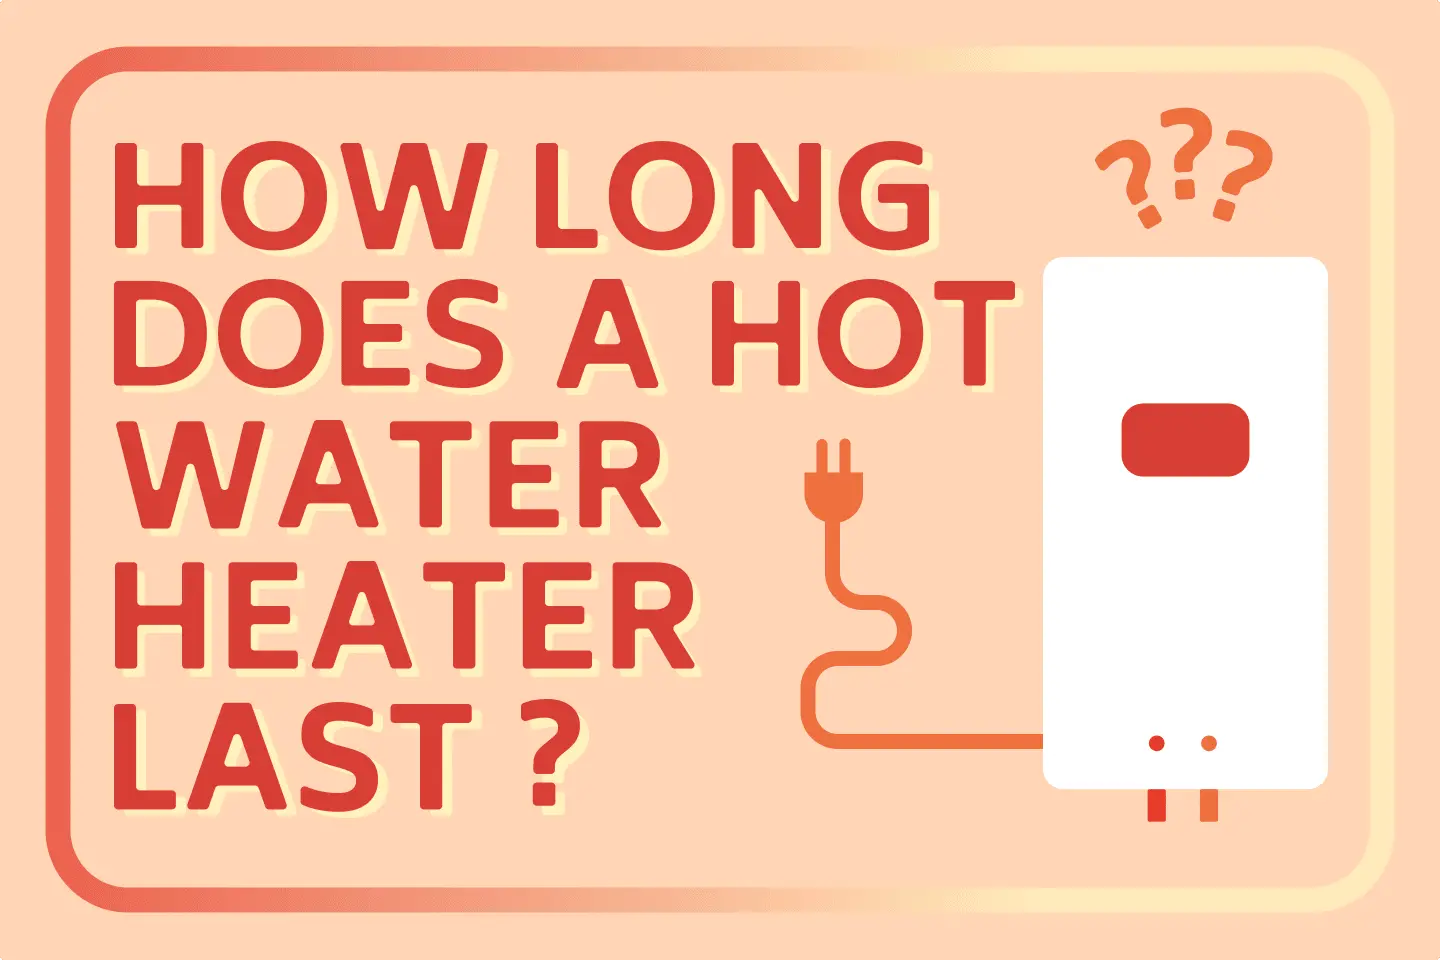 How Long Does A Hot Water Heater Last?